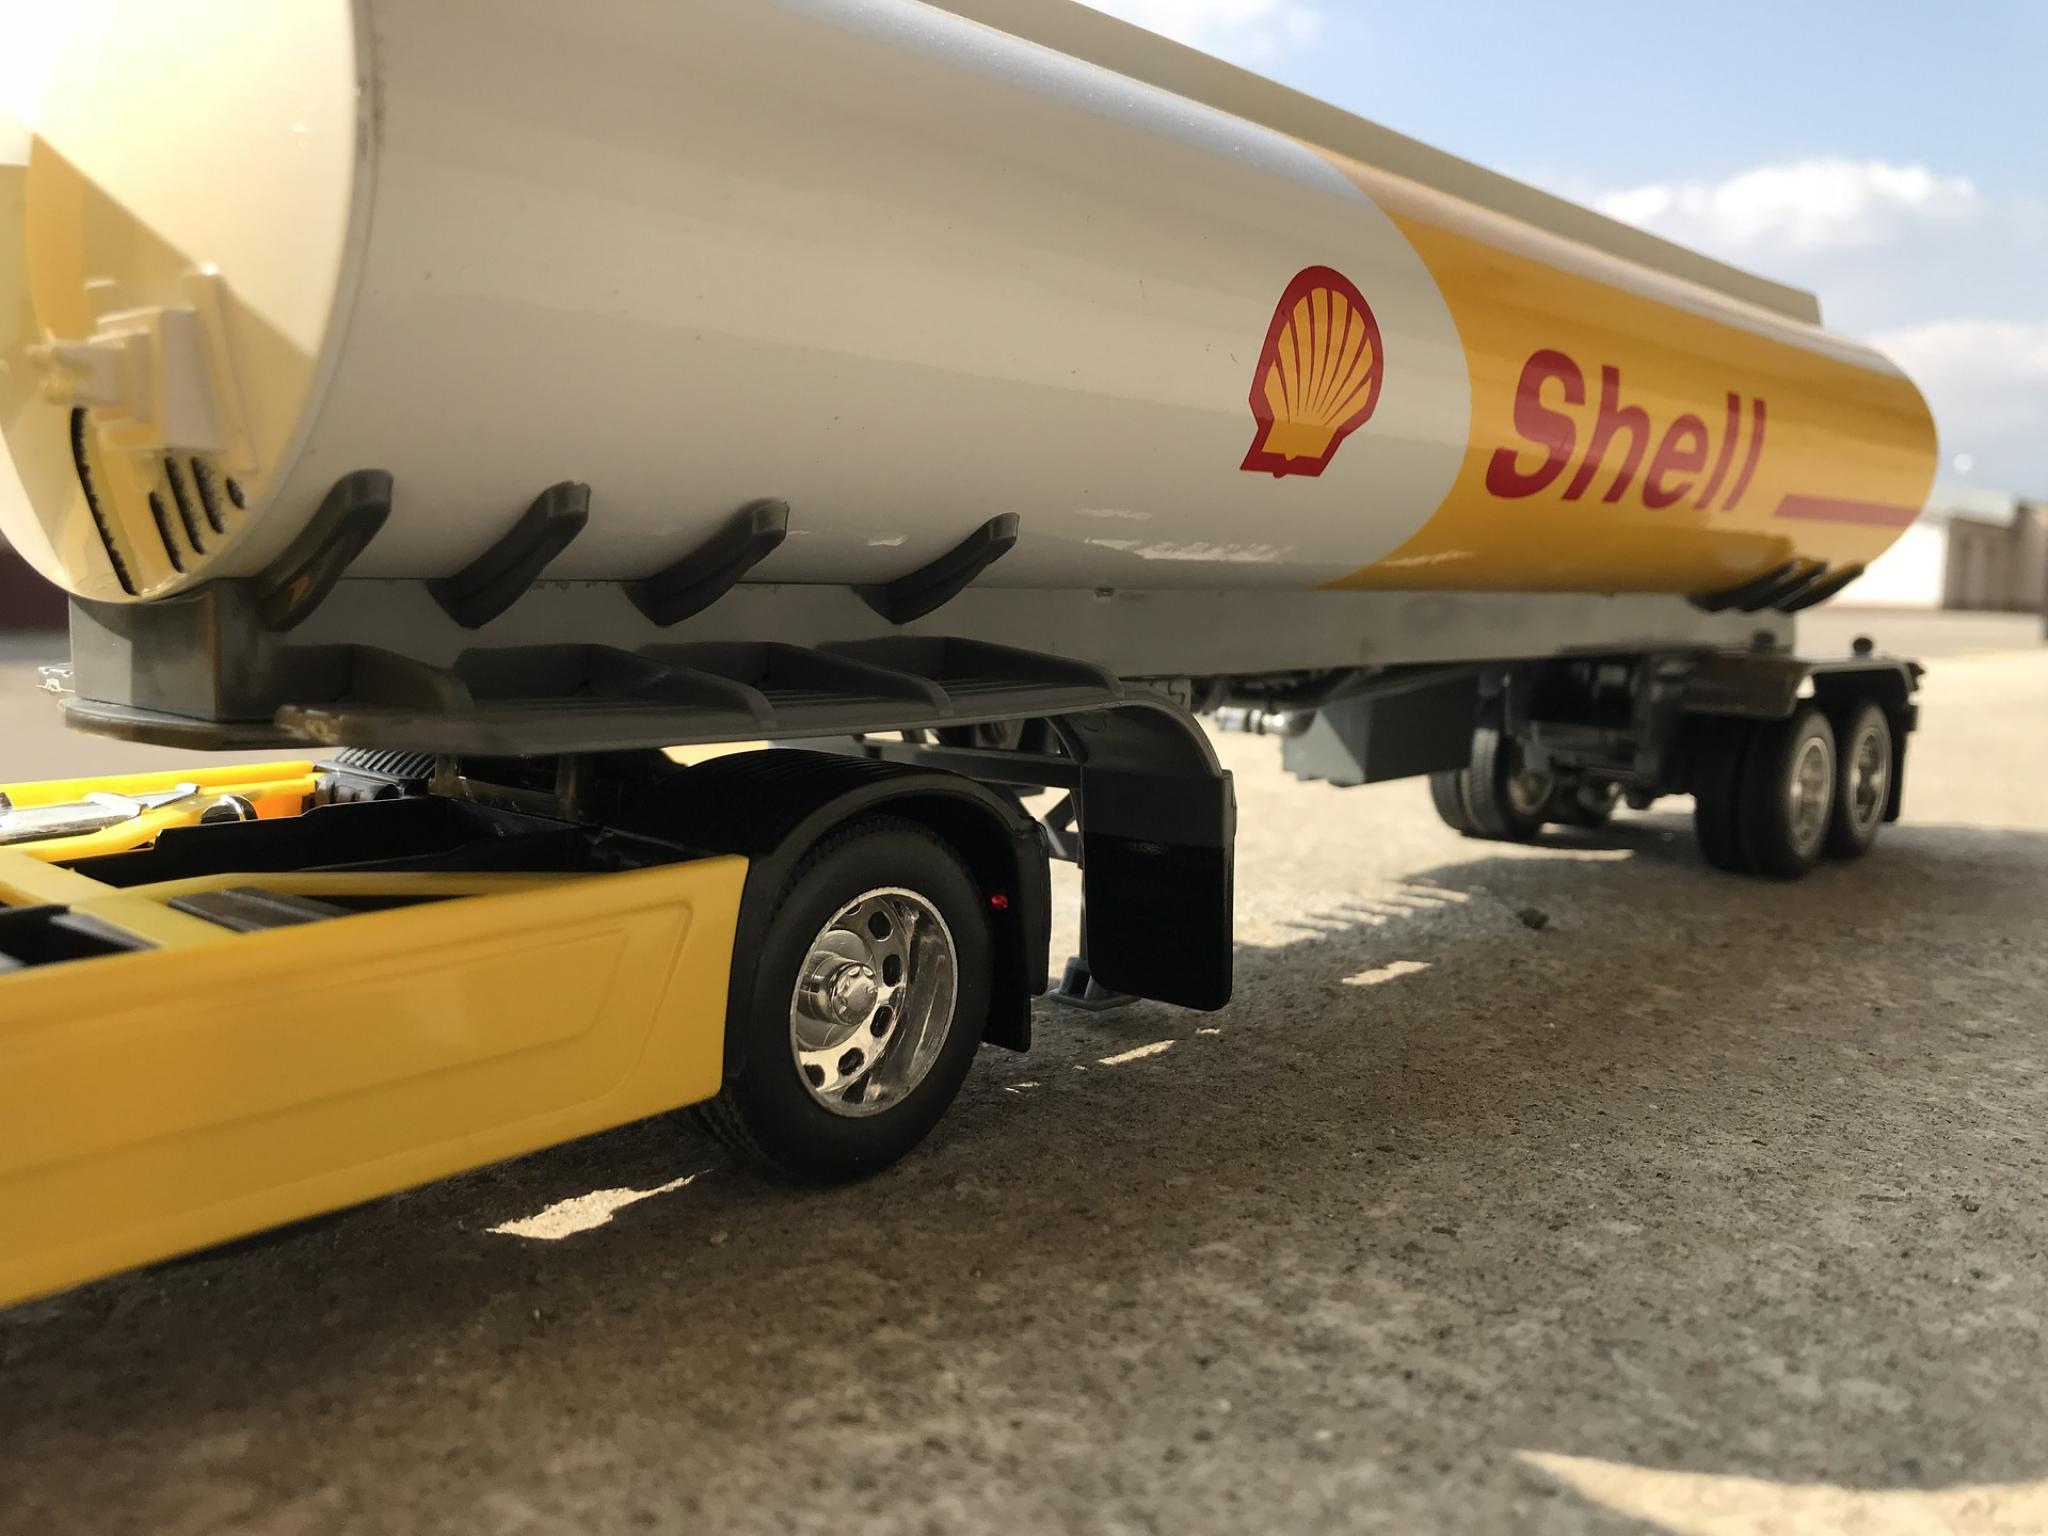  dutch-court-rules-shell-must-reduce-emissions-45-by-2030 